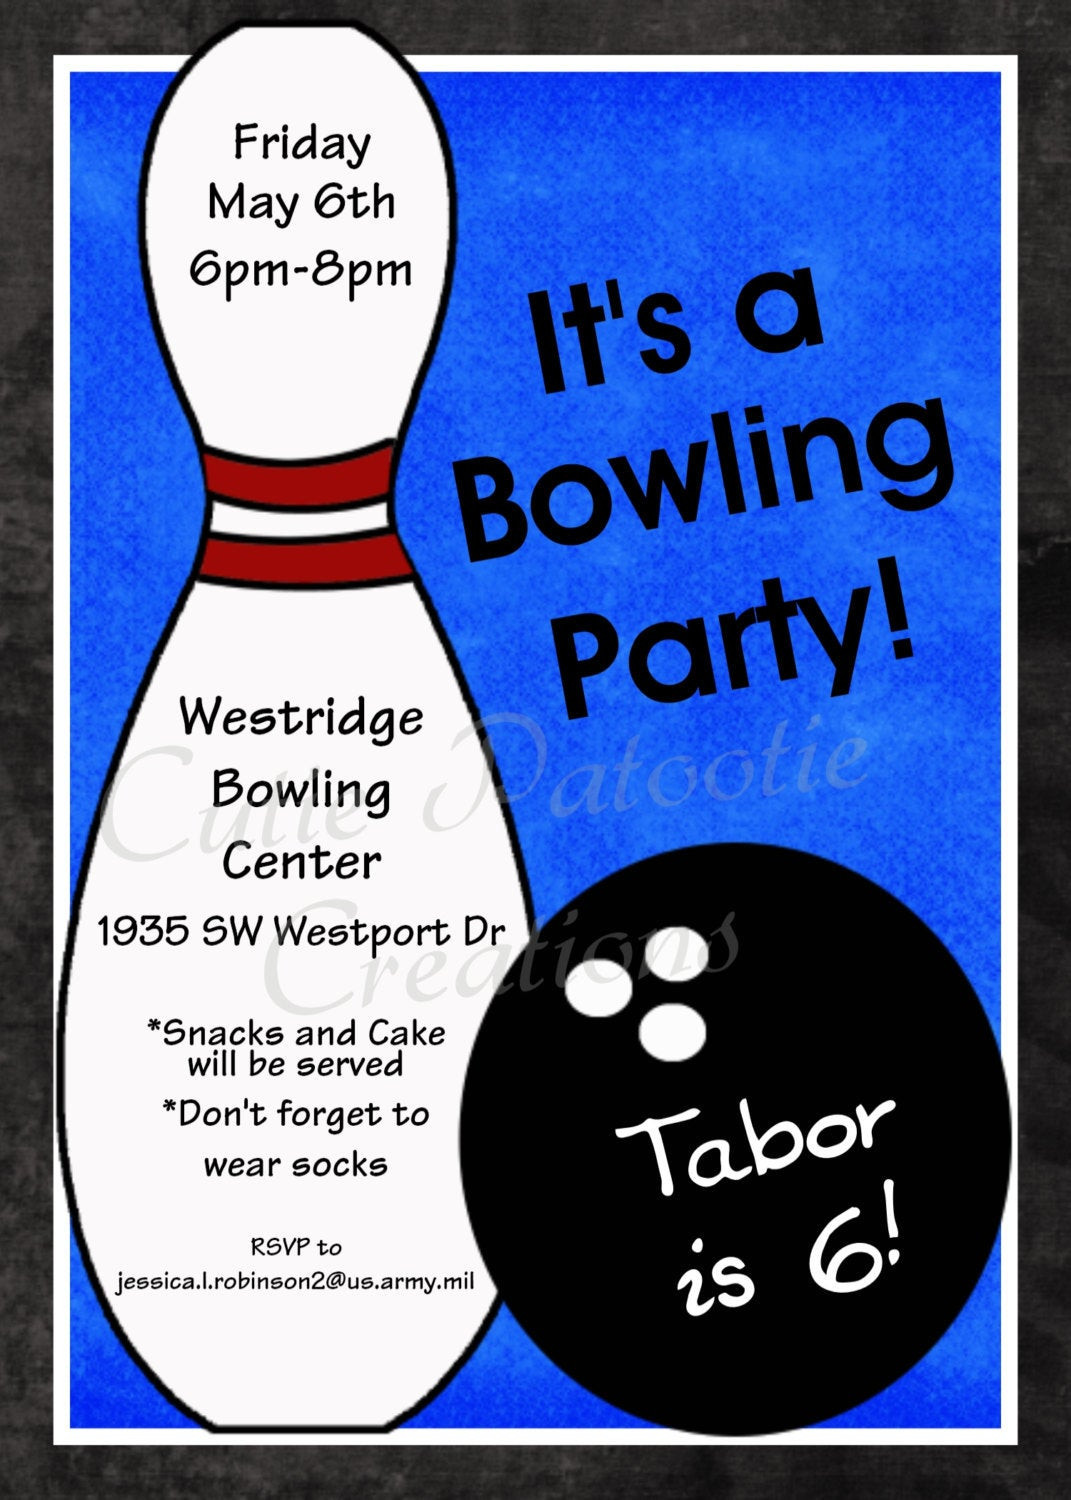 Free Printable Bowling Birthday Party Invitations
 Bowling Birthday Invitation Printable or Printed Party Invite